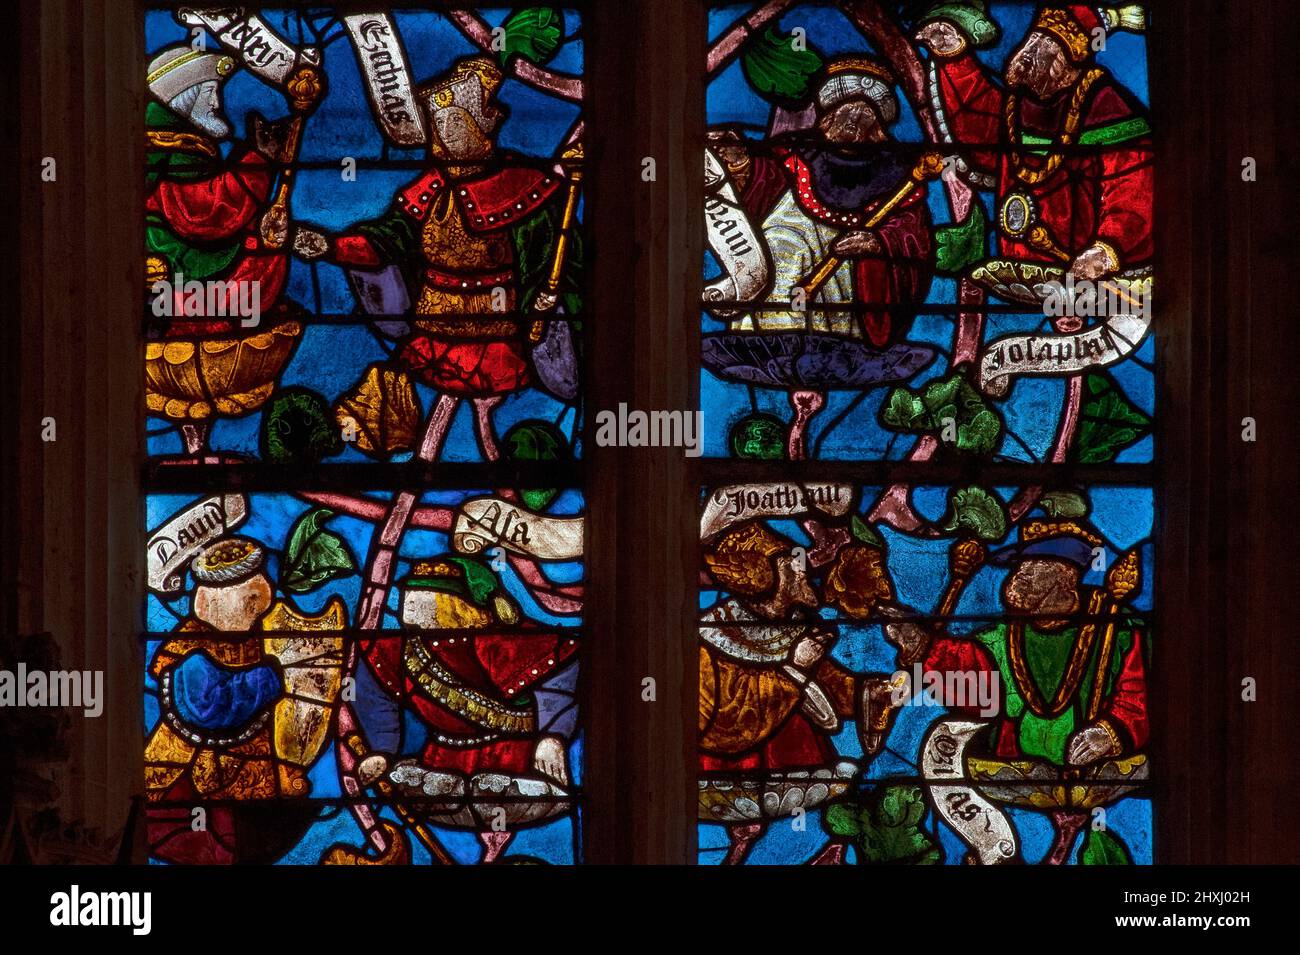 Kings of Ancient Israel and of Judah are amongst more than 40 biblical characters depicted in the panels of a magnificent Tree of Jesse, created in 1512 as a visual guide to the ancestors of Christ, which fills a window of the Église Saint-Rémi at Ceffonds, a village in the Champagne region of northeast France.  The window is a fine example of the Troyenne style of painted glass perfected at Troyes, the historic regional capital. Stock Photo